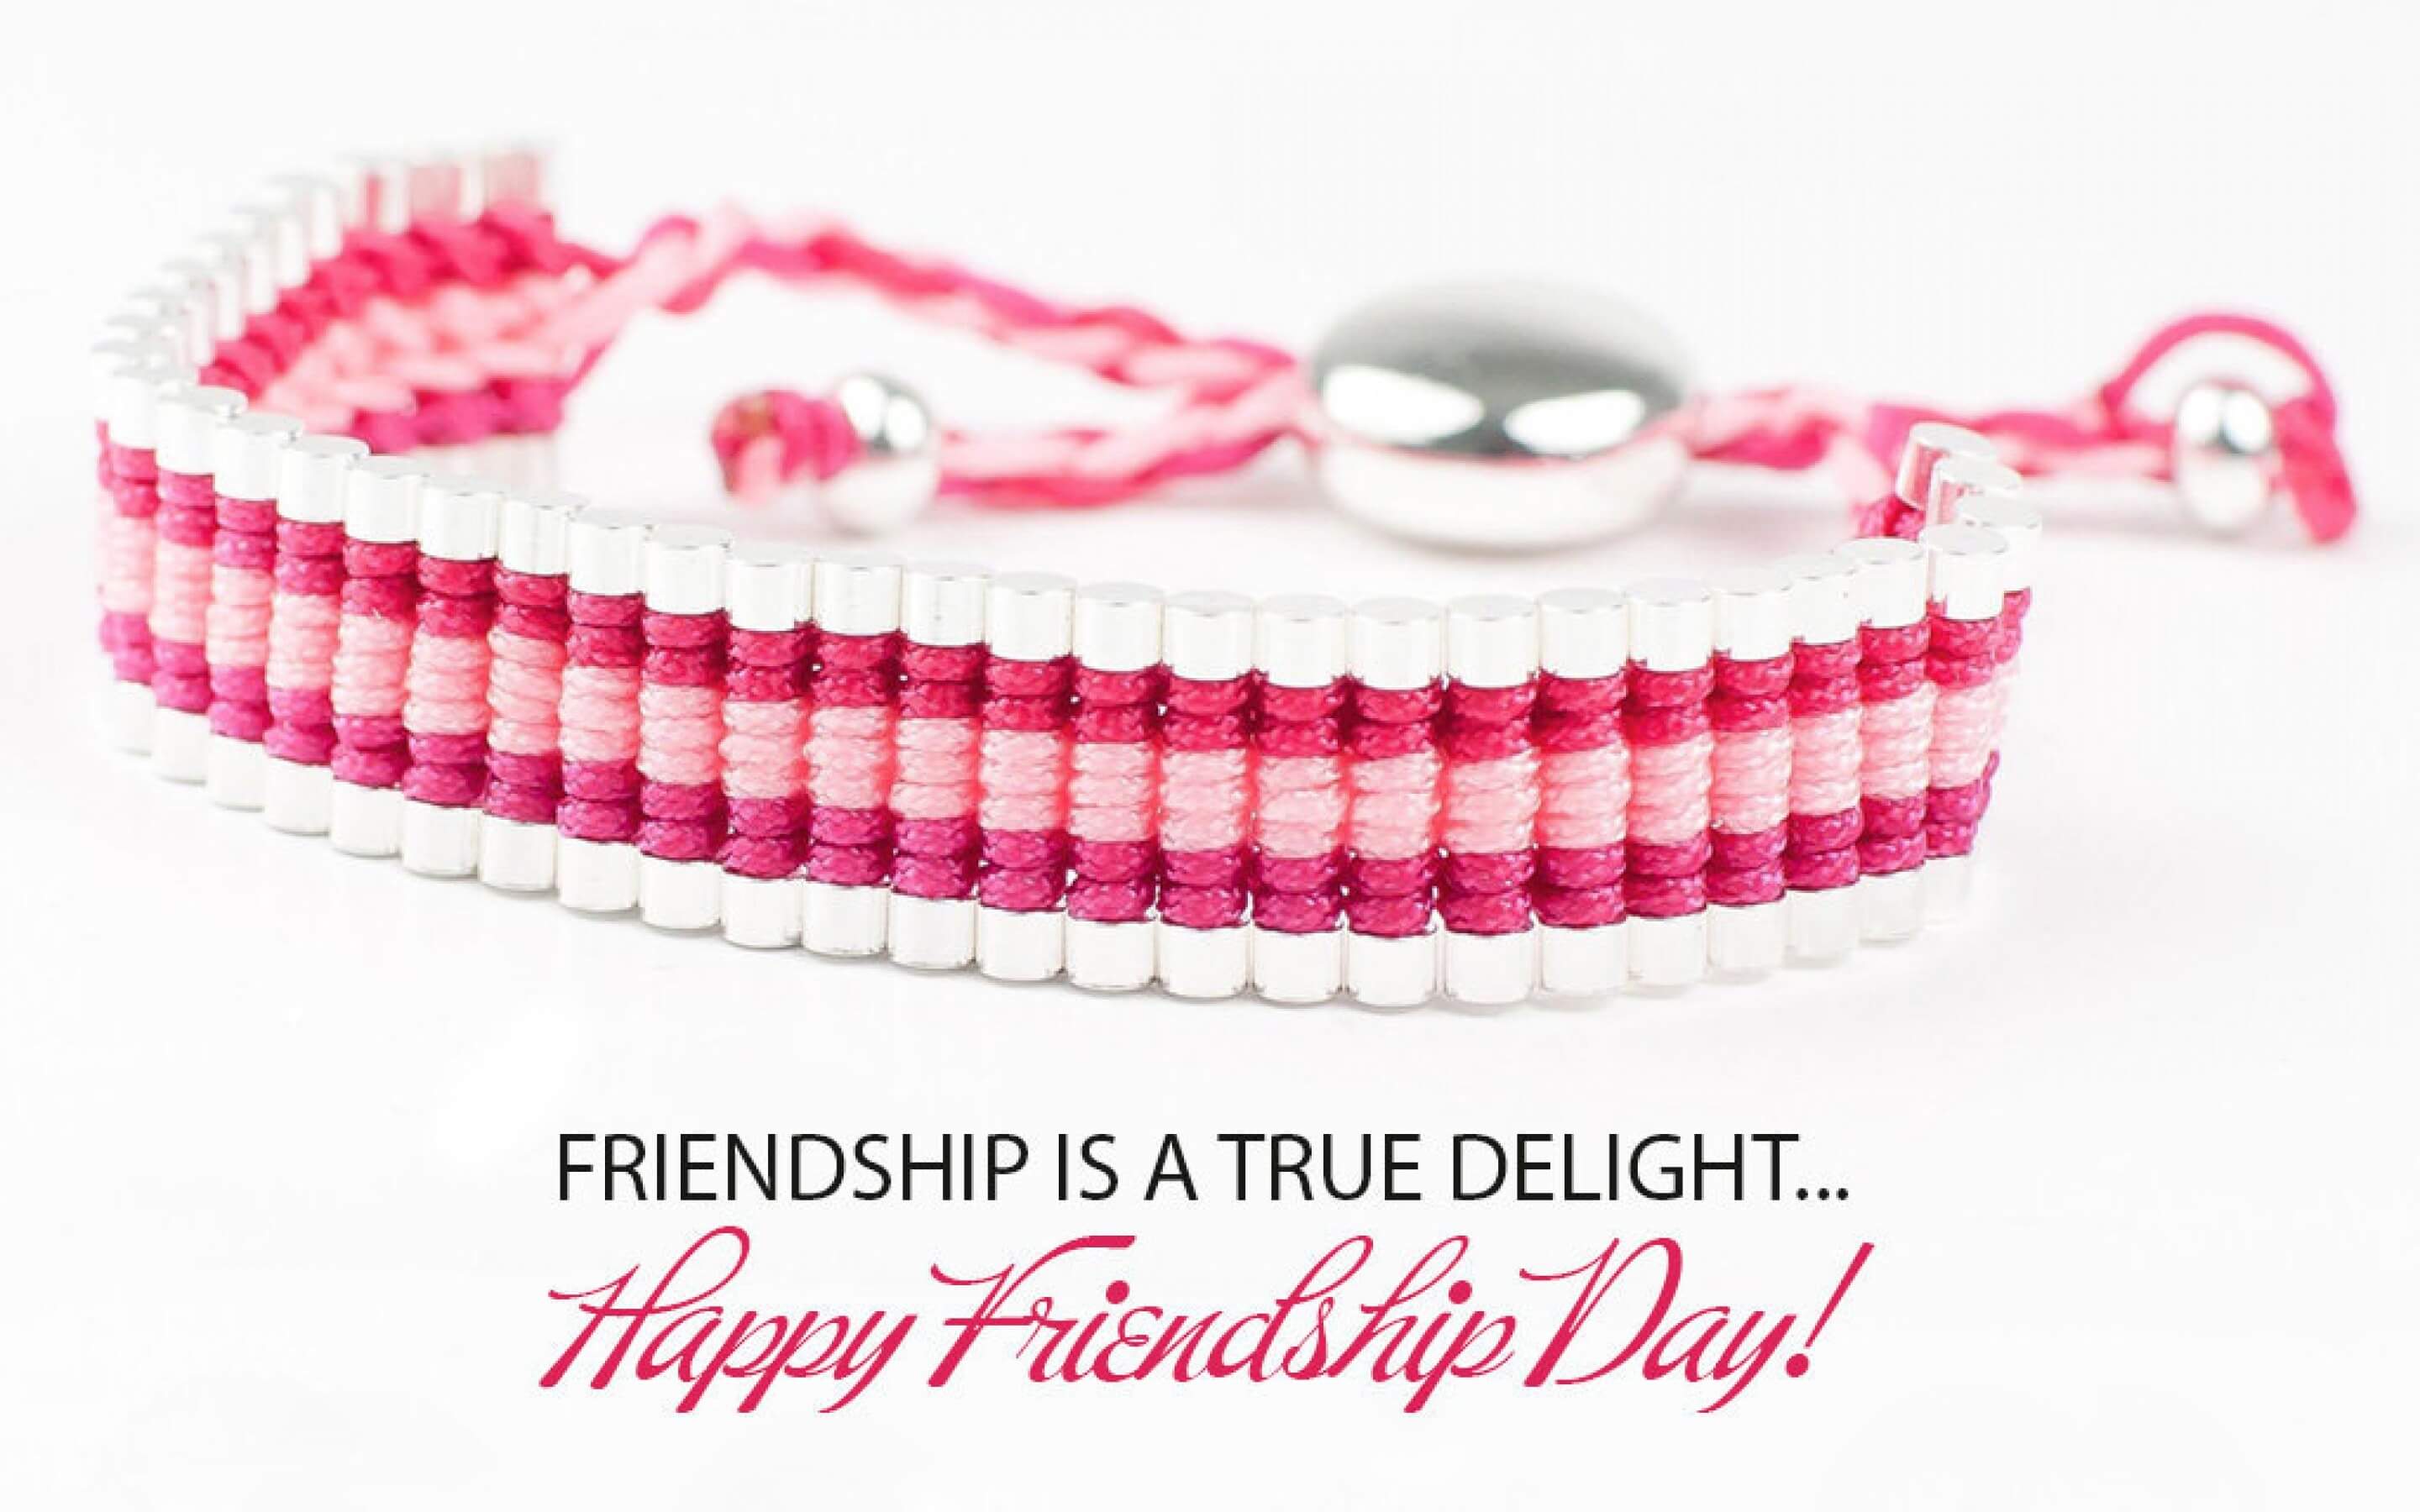 Happy Friendship Day Quotes, Image, Messages, Greetings, Wishes, Wallpaper, Pics and Photo